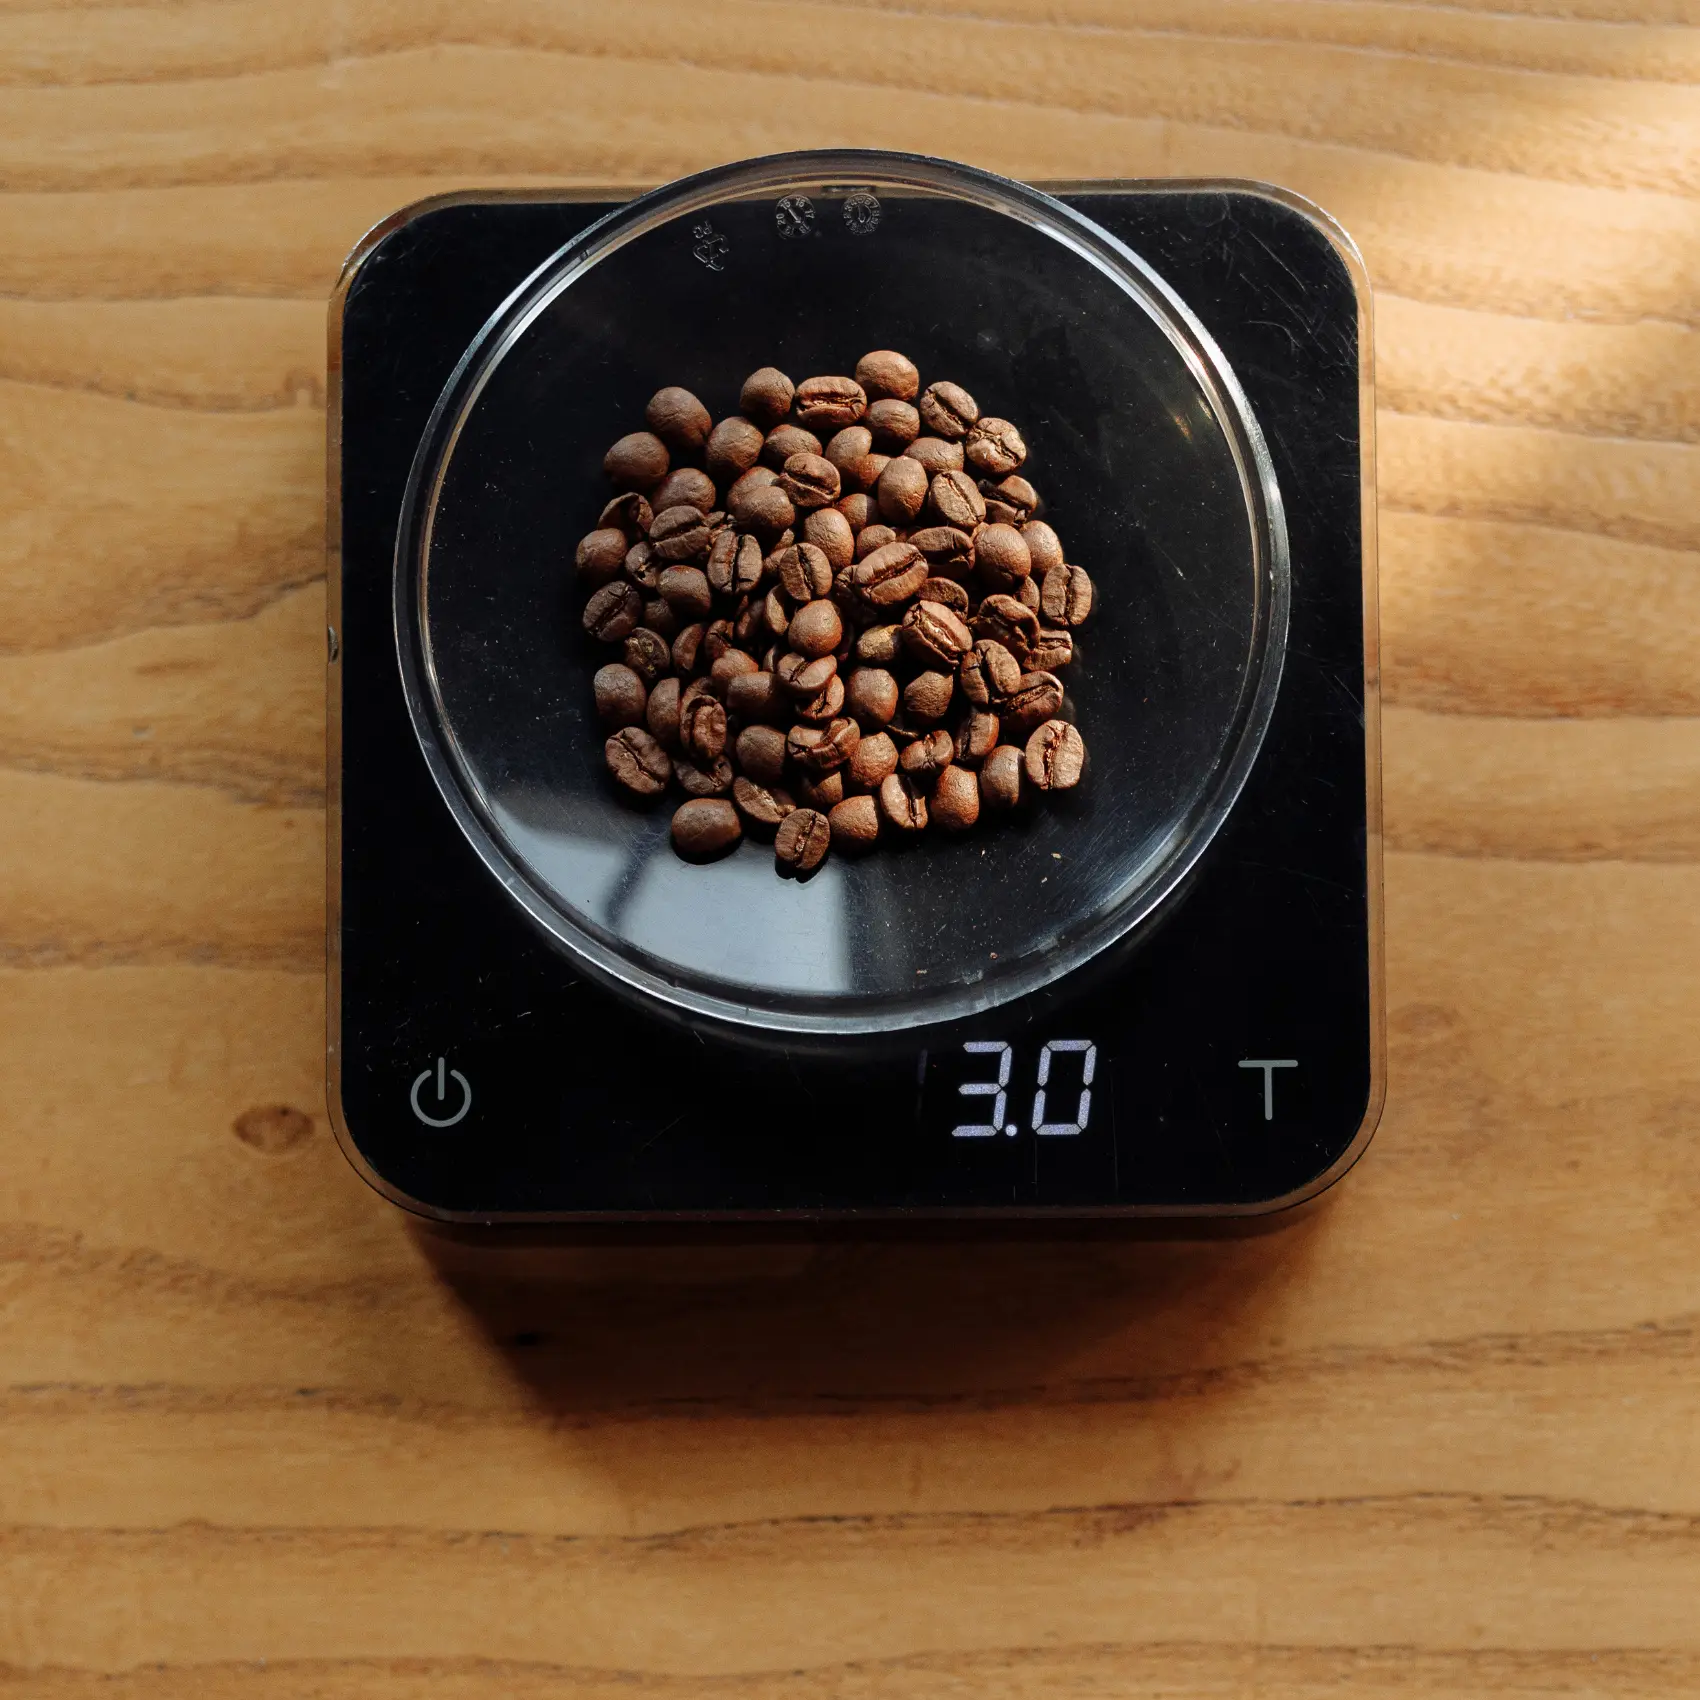 Coffee Gator Coffee Scale with Timer Digital Multifunction Weighing Scale - Large, Bright LCD Display - Espresso Scale, Coffee Brewing, Food, Drink